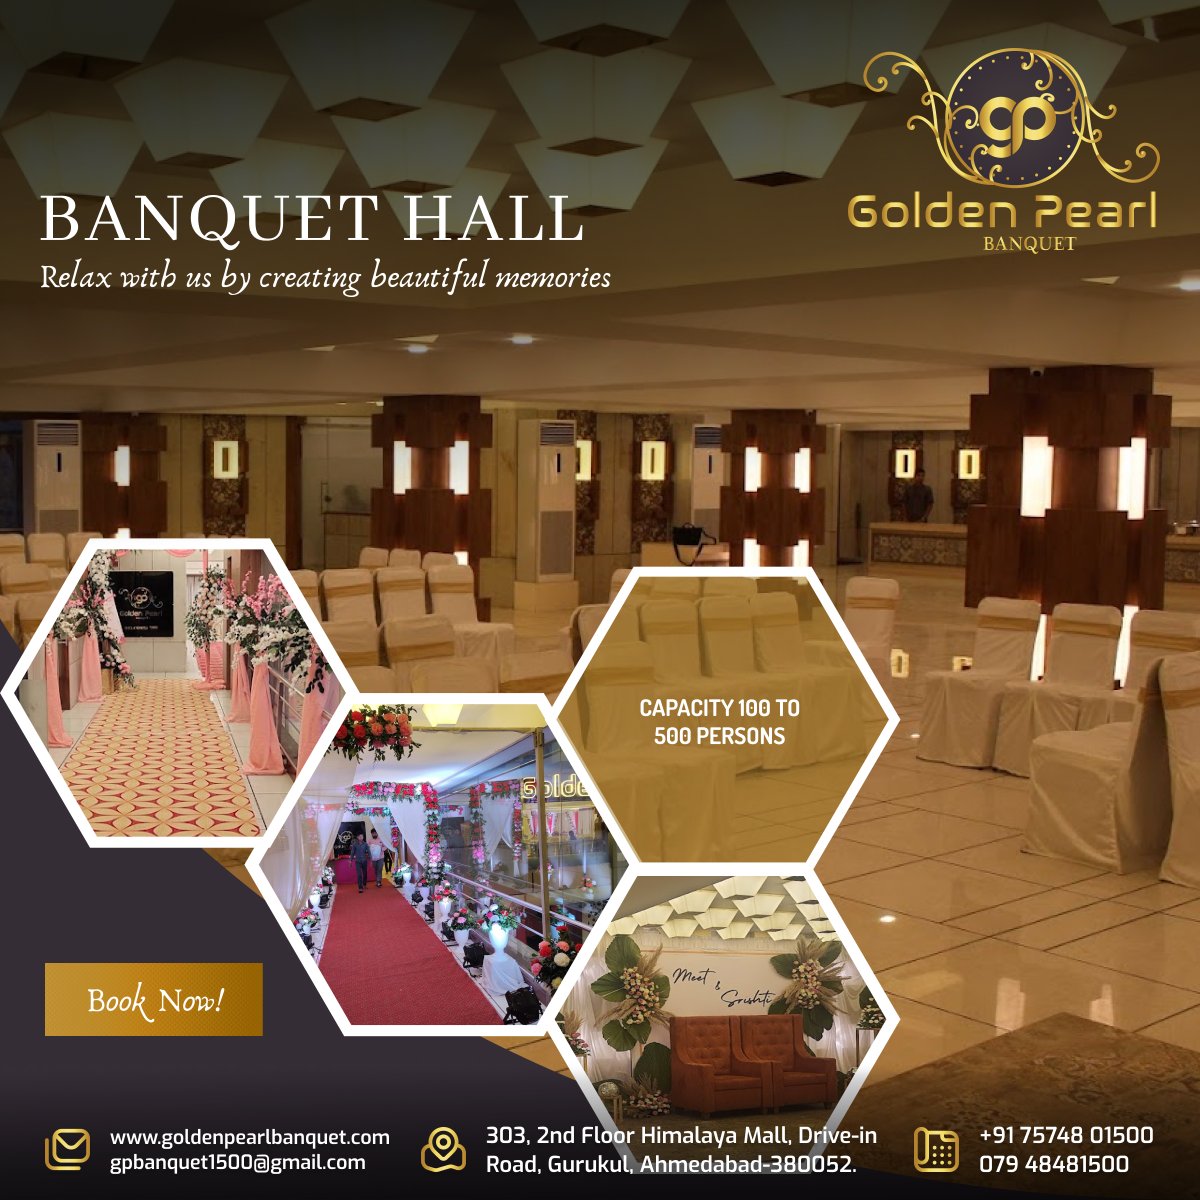 Banquet Hall Relax with Us By Creating Beautiful Memories

#GoldenPearl #banquet #ahmedabad #gurukulahmedabad #banquethall #event #party #wedding #birthday #ringceremony #food #enjoyment #celebrations